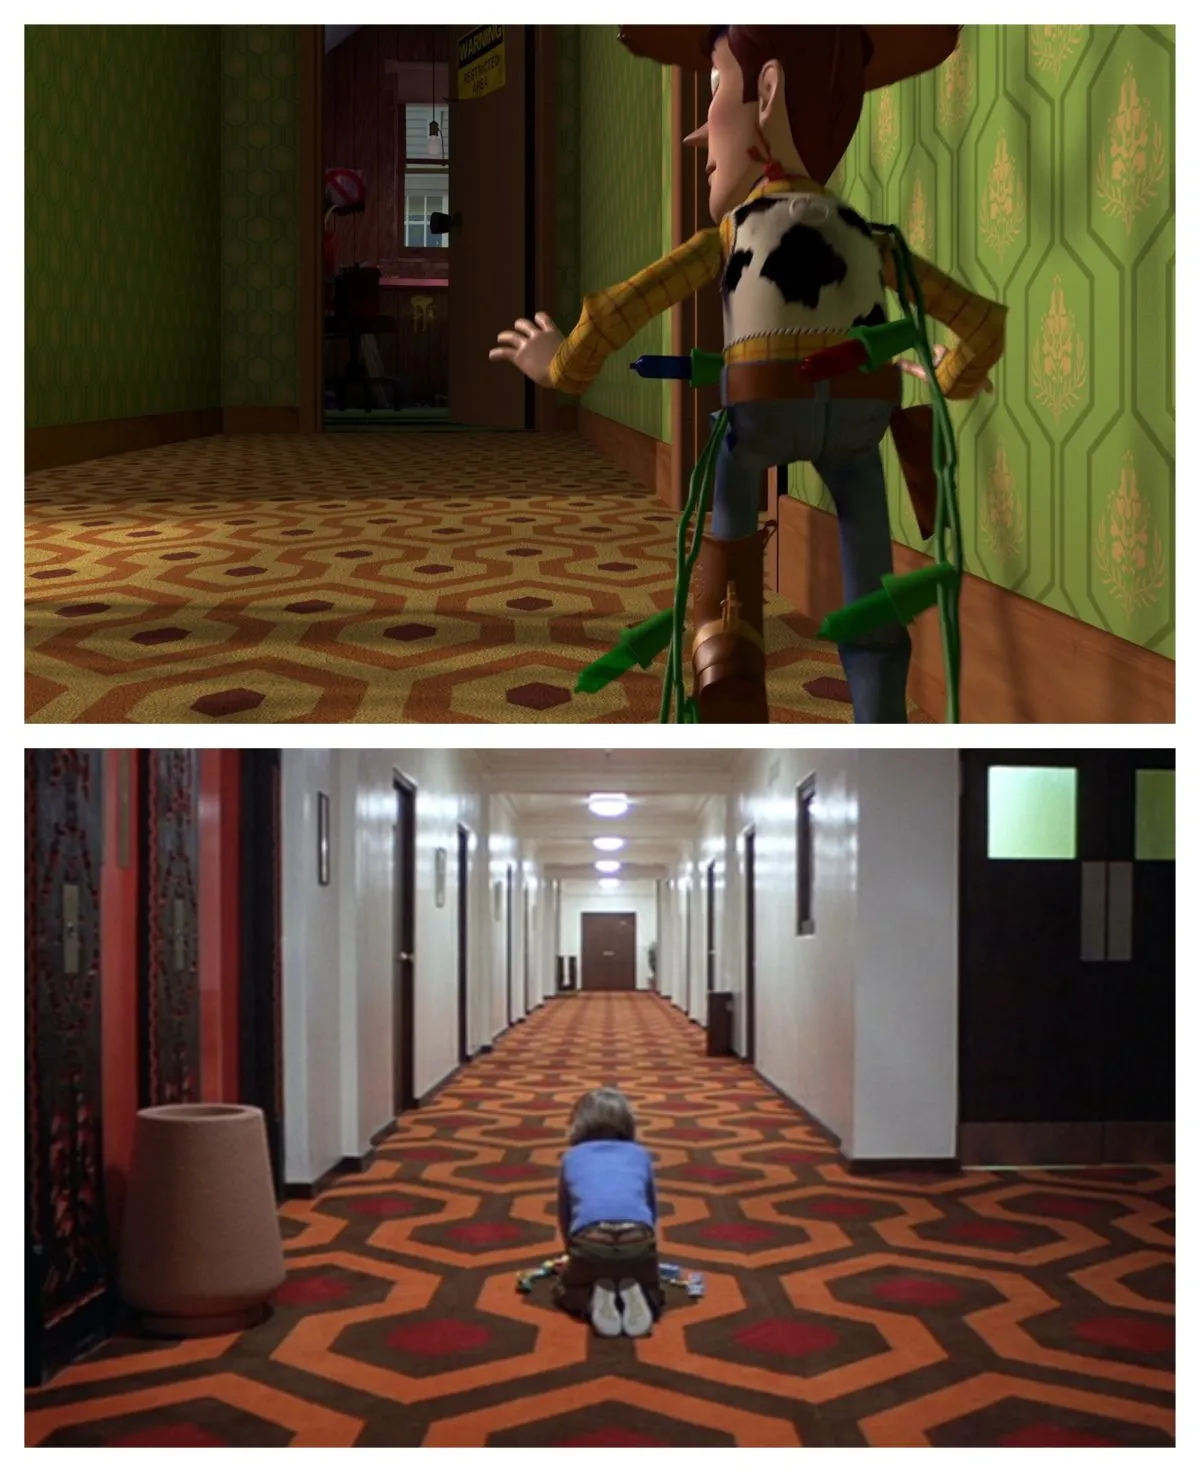 The Shining in Toy Story